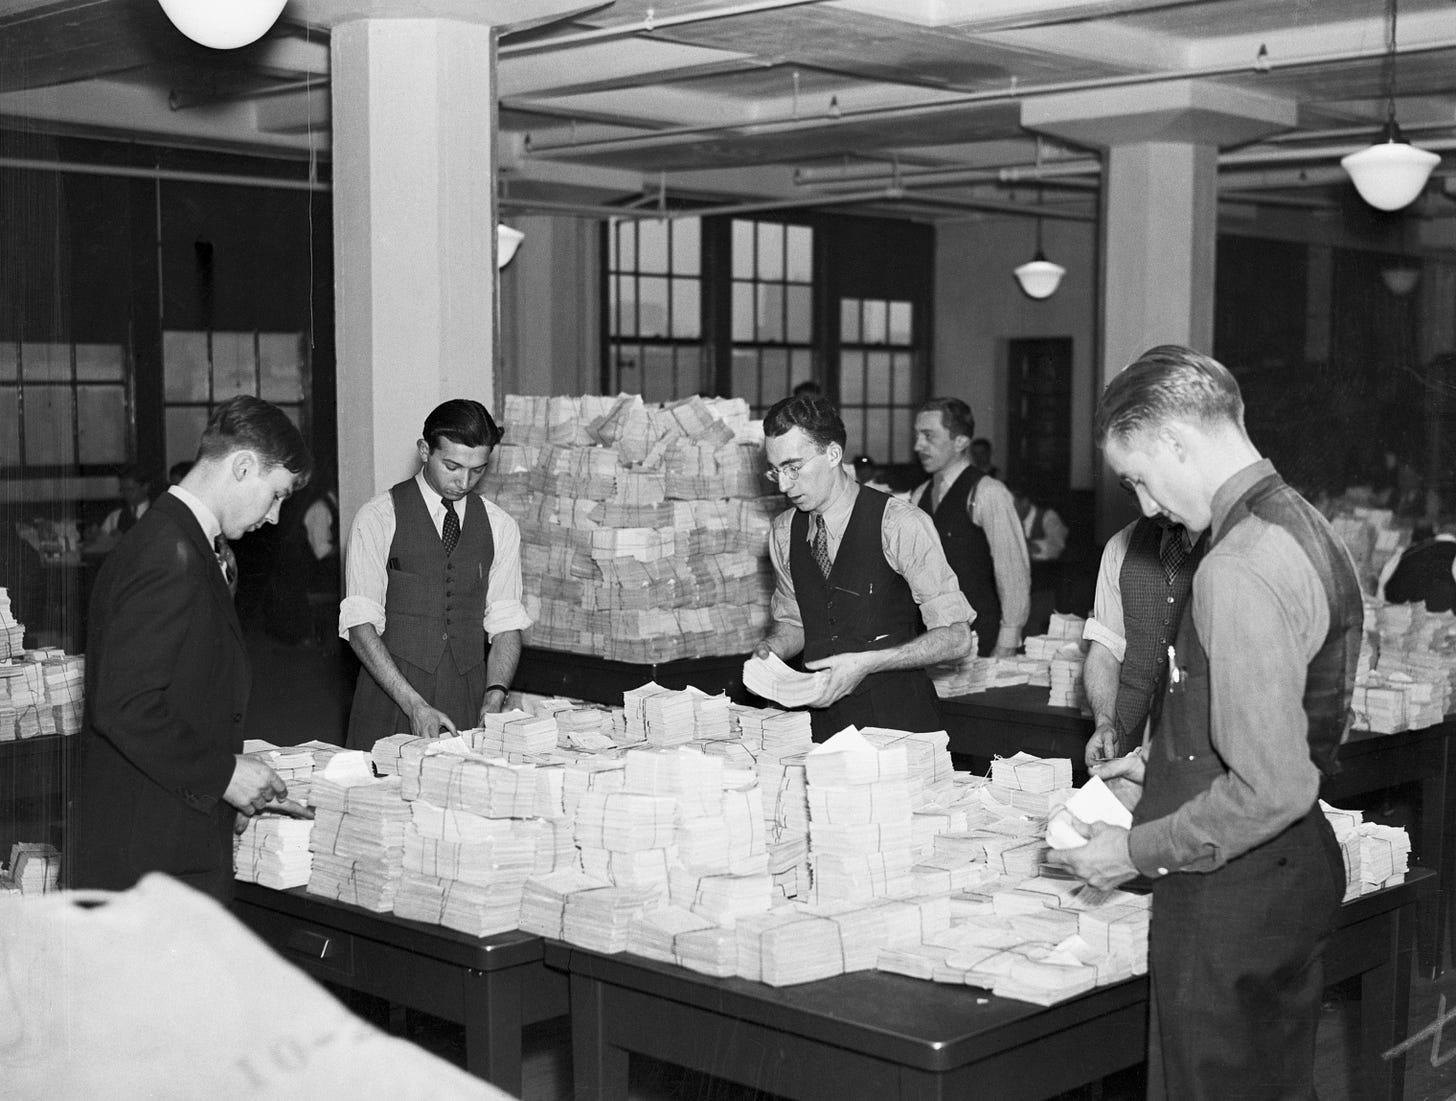 Employees at the Wage Records Office establish individual Social Security accounts for millions of workers, 1936. (Bettmann via Getty Images).